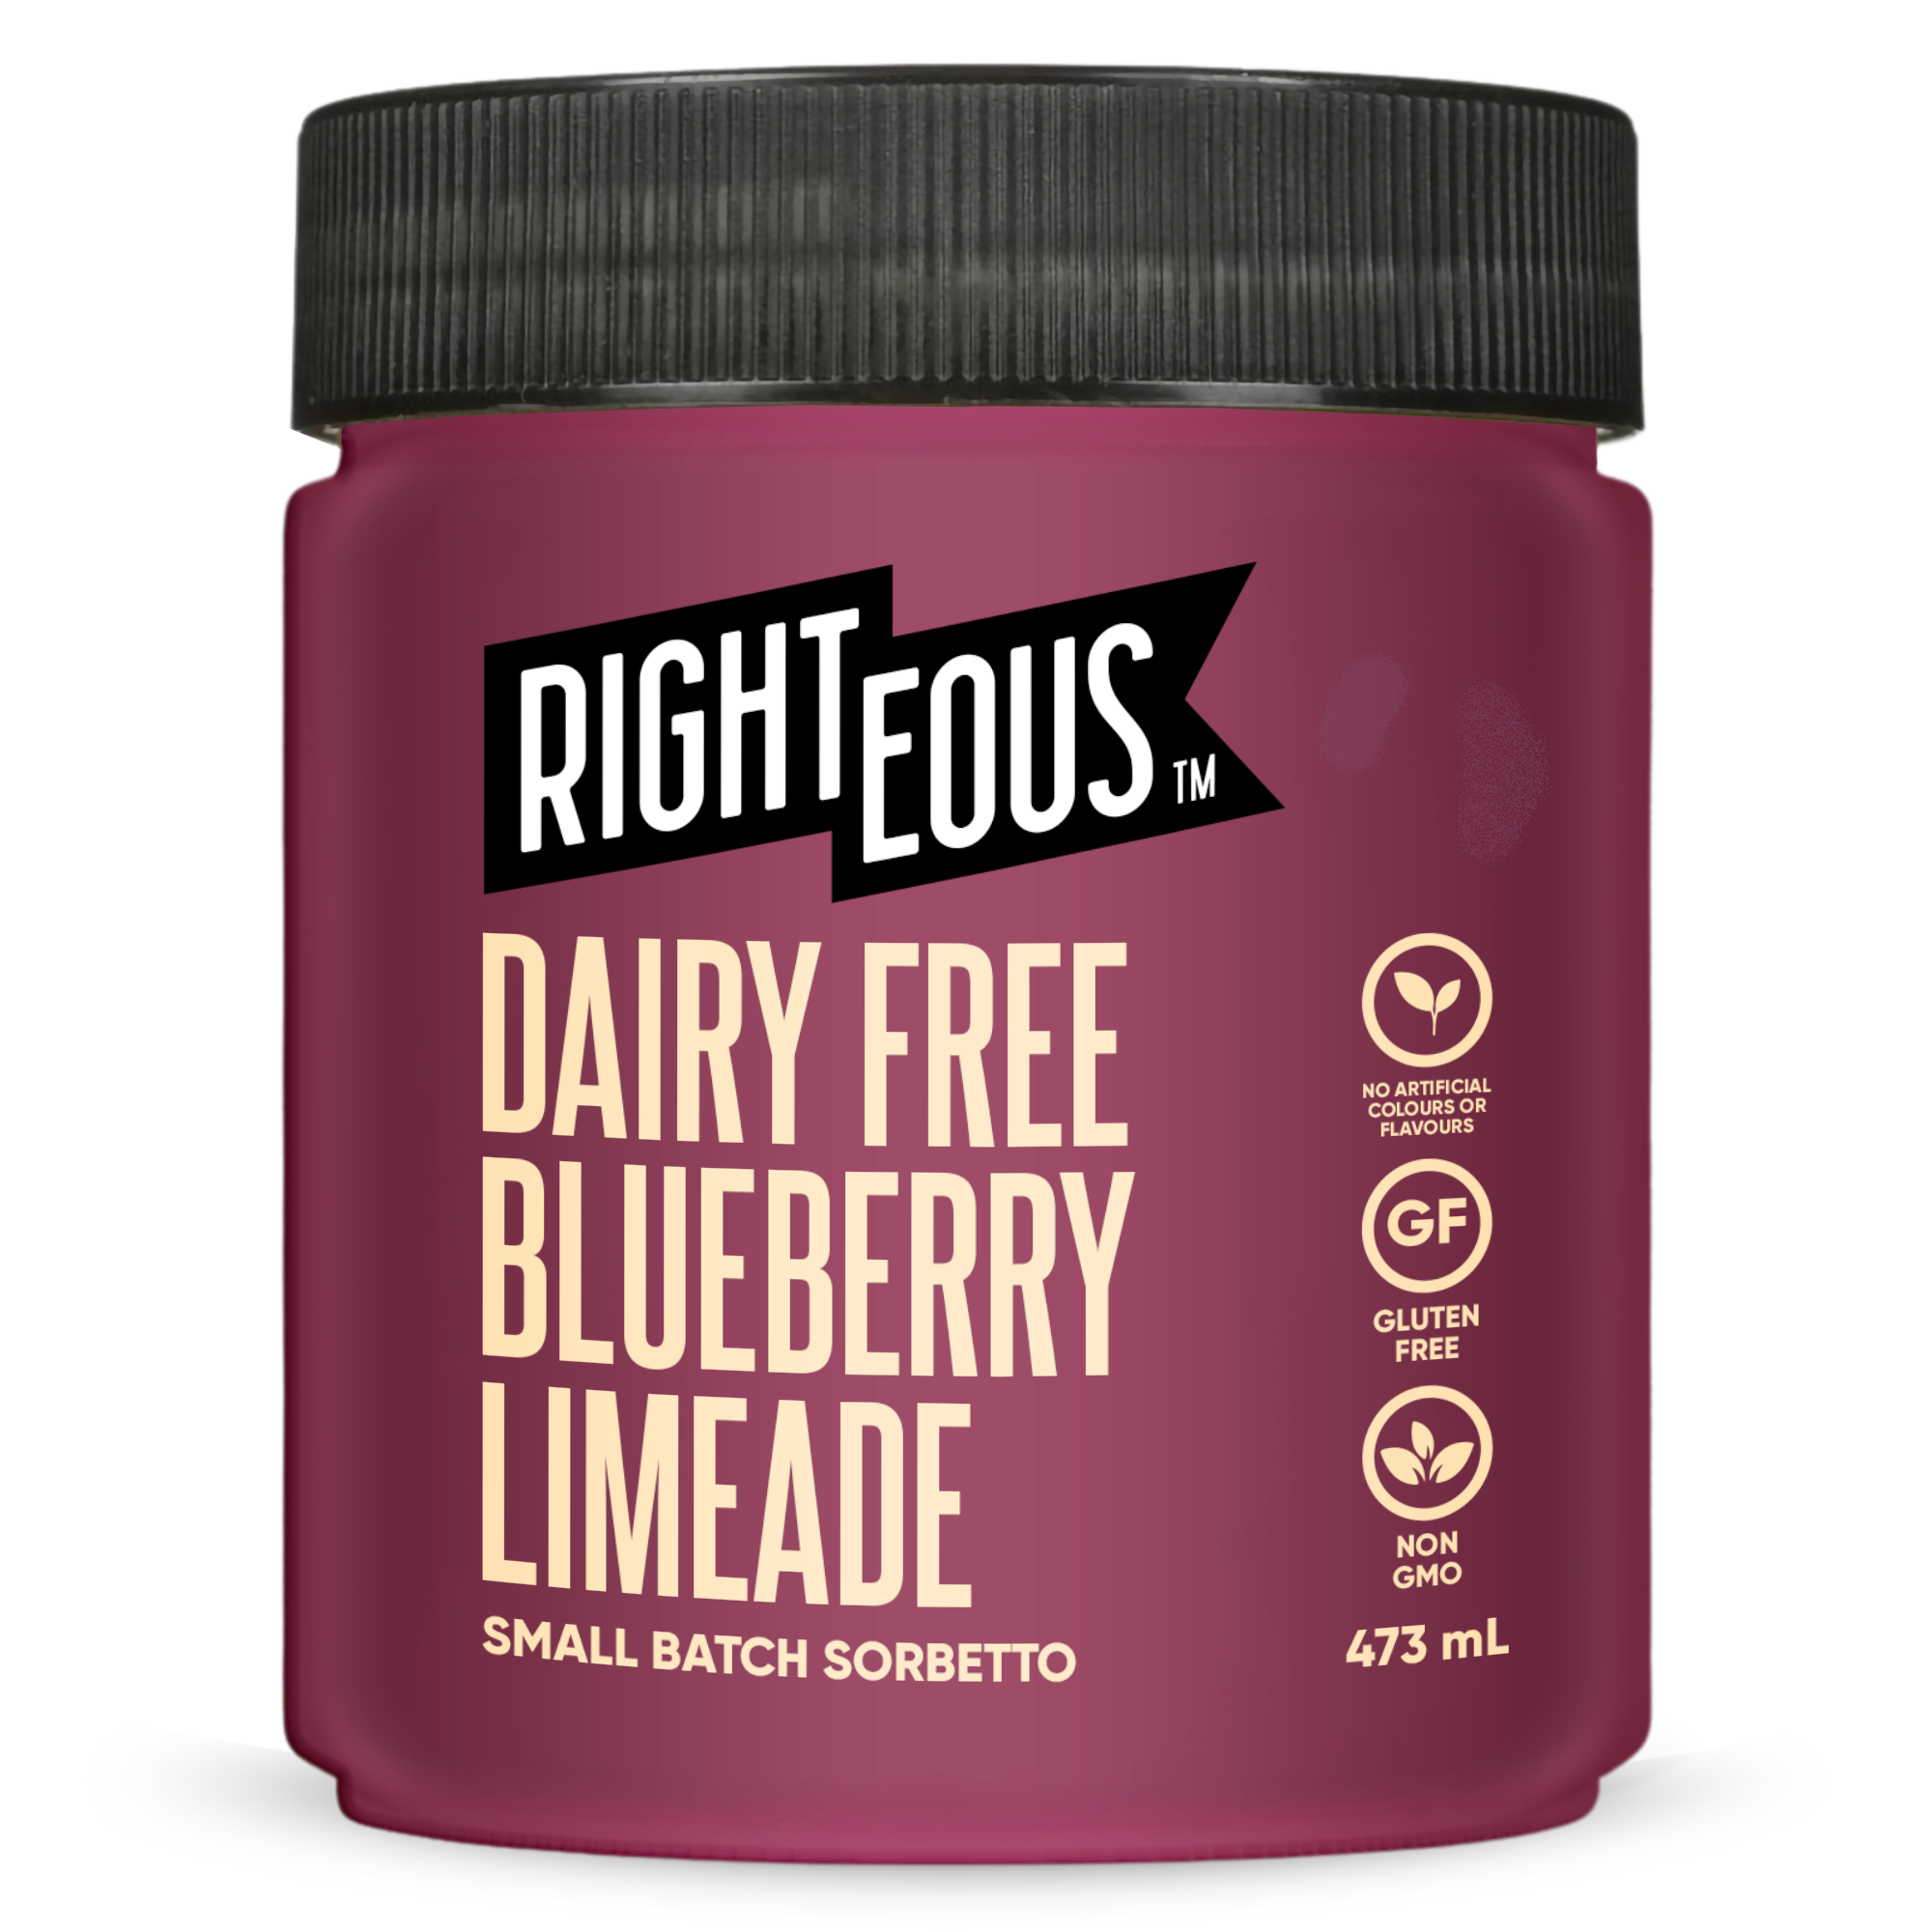 Dairy Free Blueberry Limeade Sorbetto